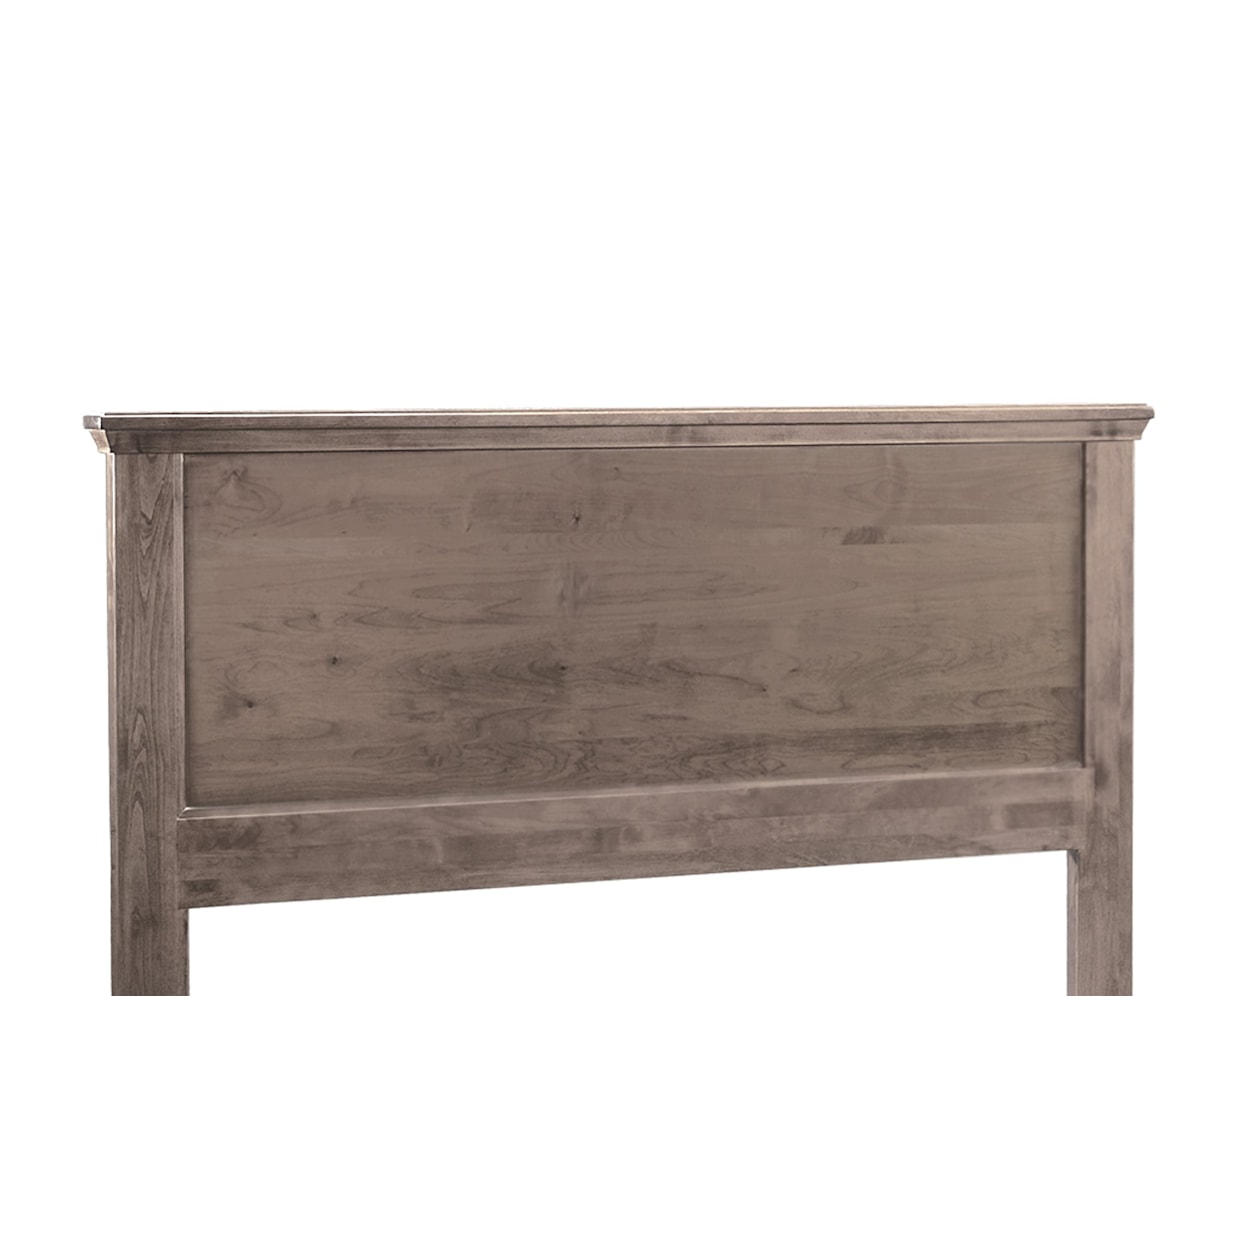 Archbold Furniture Heritage Twin Plank Headboard Only